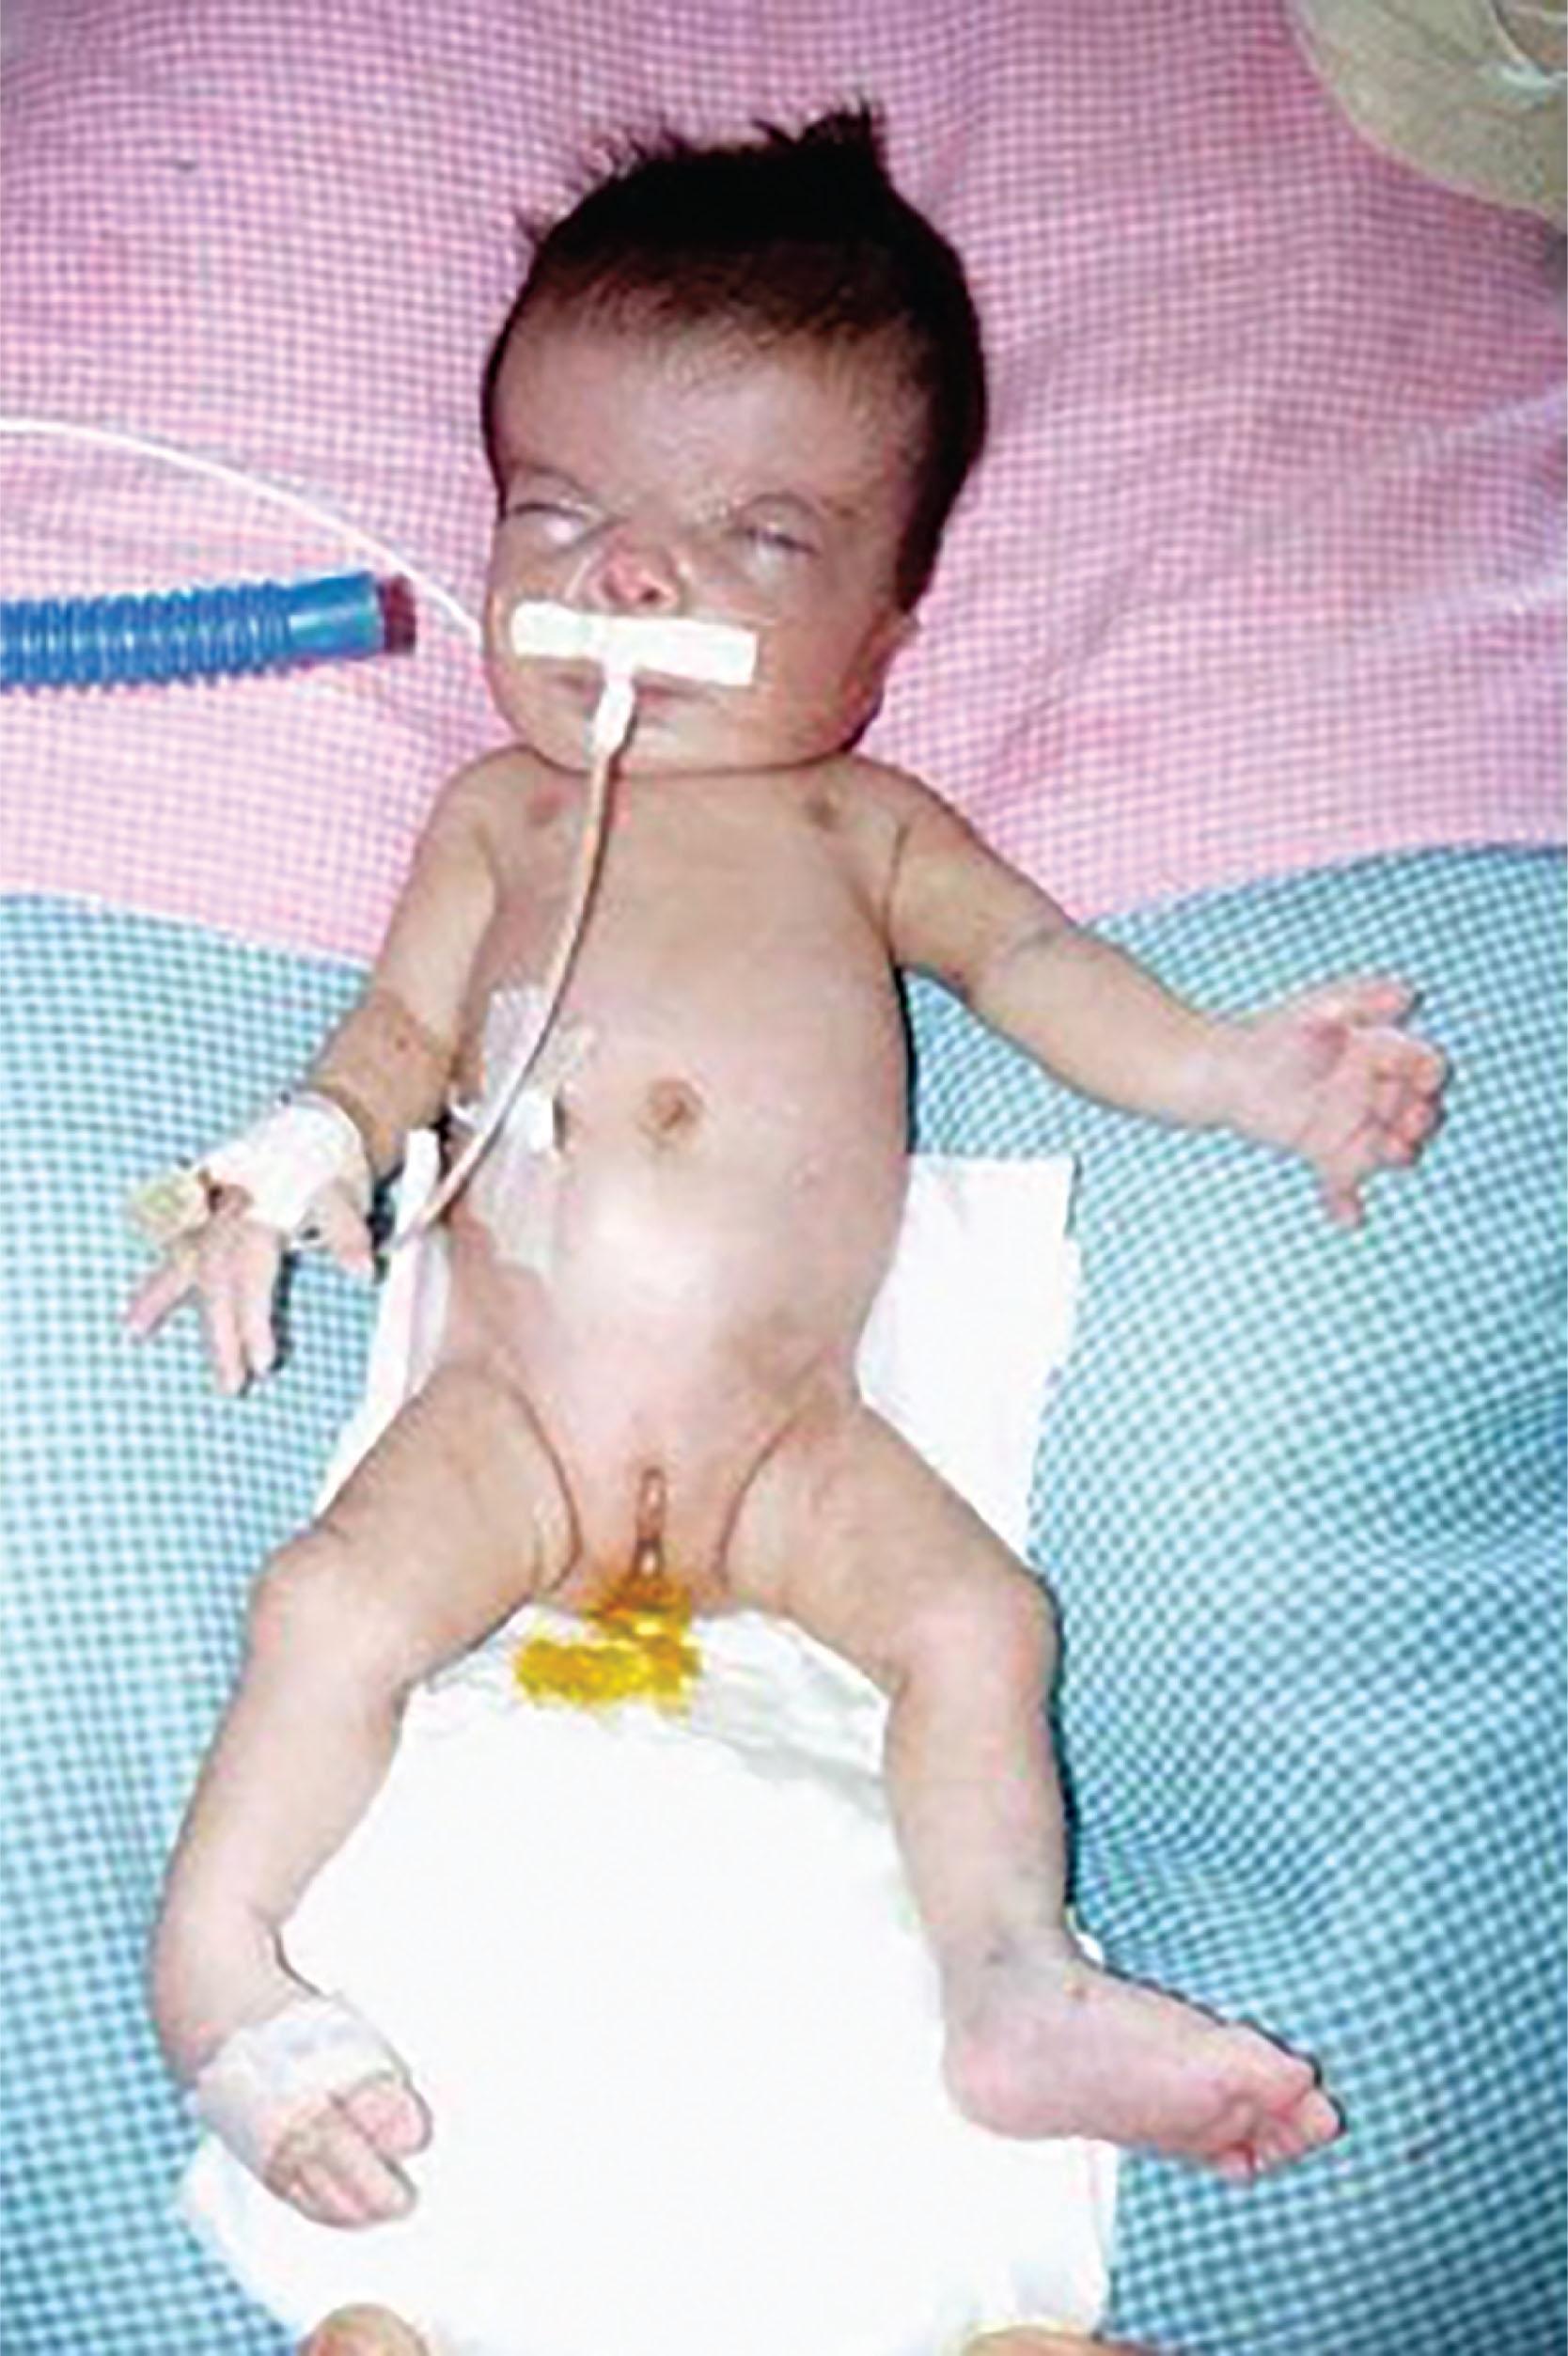 FIGURE 50.3, This newborn was born with methotrexate embryopathy after exposure to low-dose weekly methotrexate (7.5 mg) during the first trimester of pregnancy. They were born with intrauterine growth restriction at 31 weeks with microcephaly, wide anterior fontanel, high forehead, low nasal bridge, ocular proptosis, dysplastic low-set ears, high arched palate, short neck, narrow chest, abnormal fifth fingers, and right clubfoot. Brain ultrasound showed moderate dilatation of the lateral ventricles. Radiographs of the hands showed absence of the fifth metacarpal bone and phalanges bilaterally.